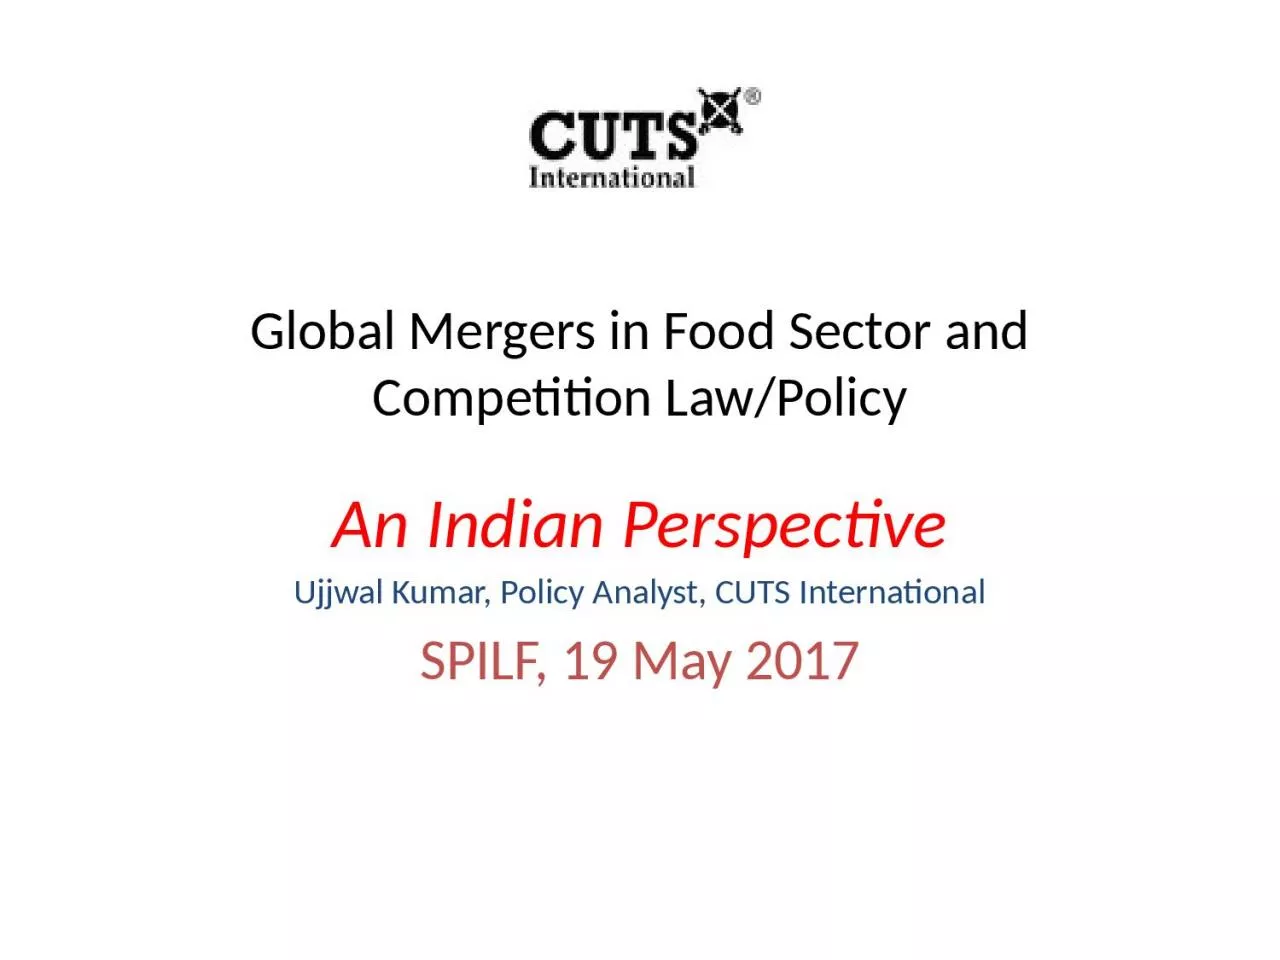 Global Mergers in Food Sector and Competition Law/Policy